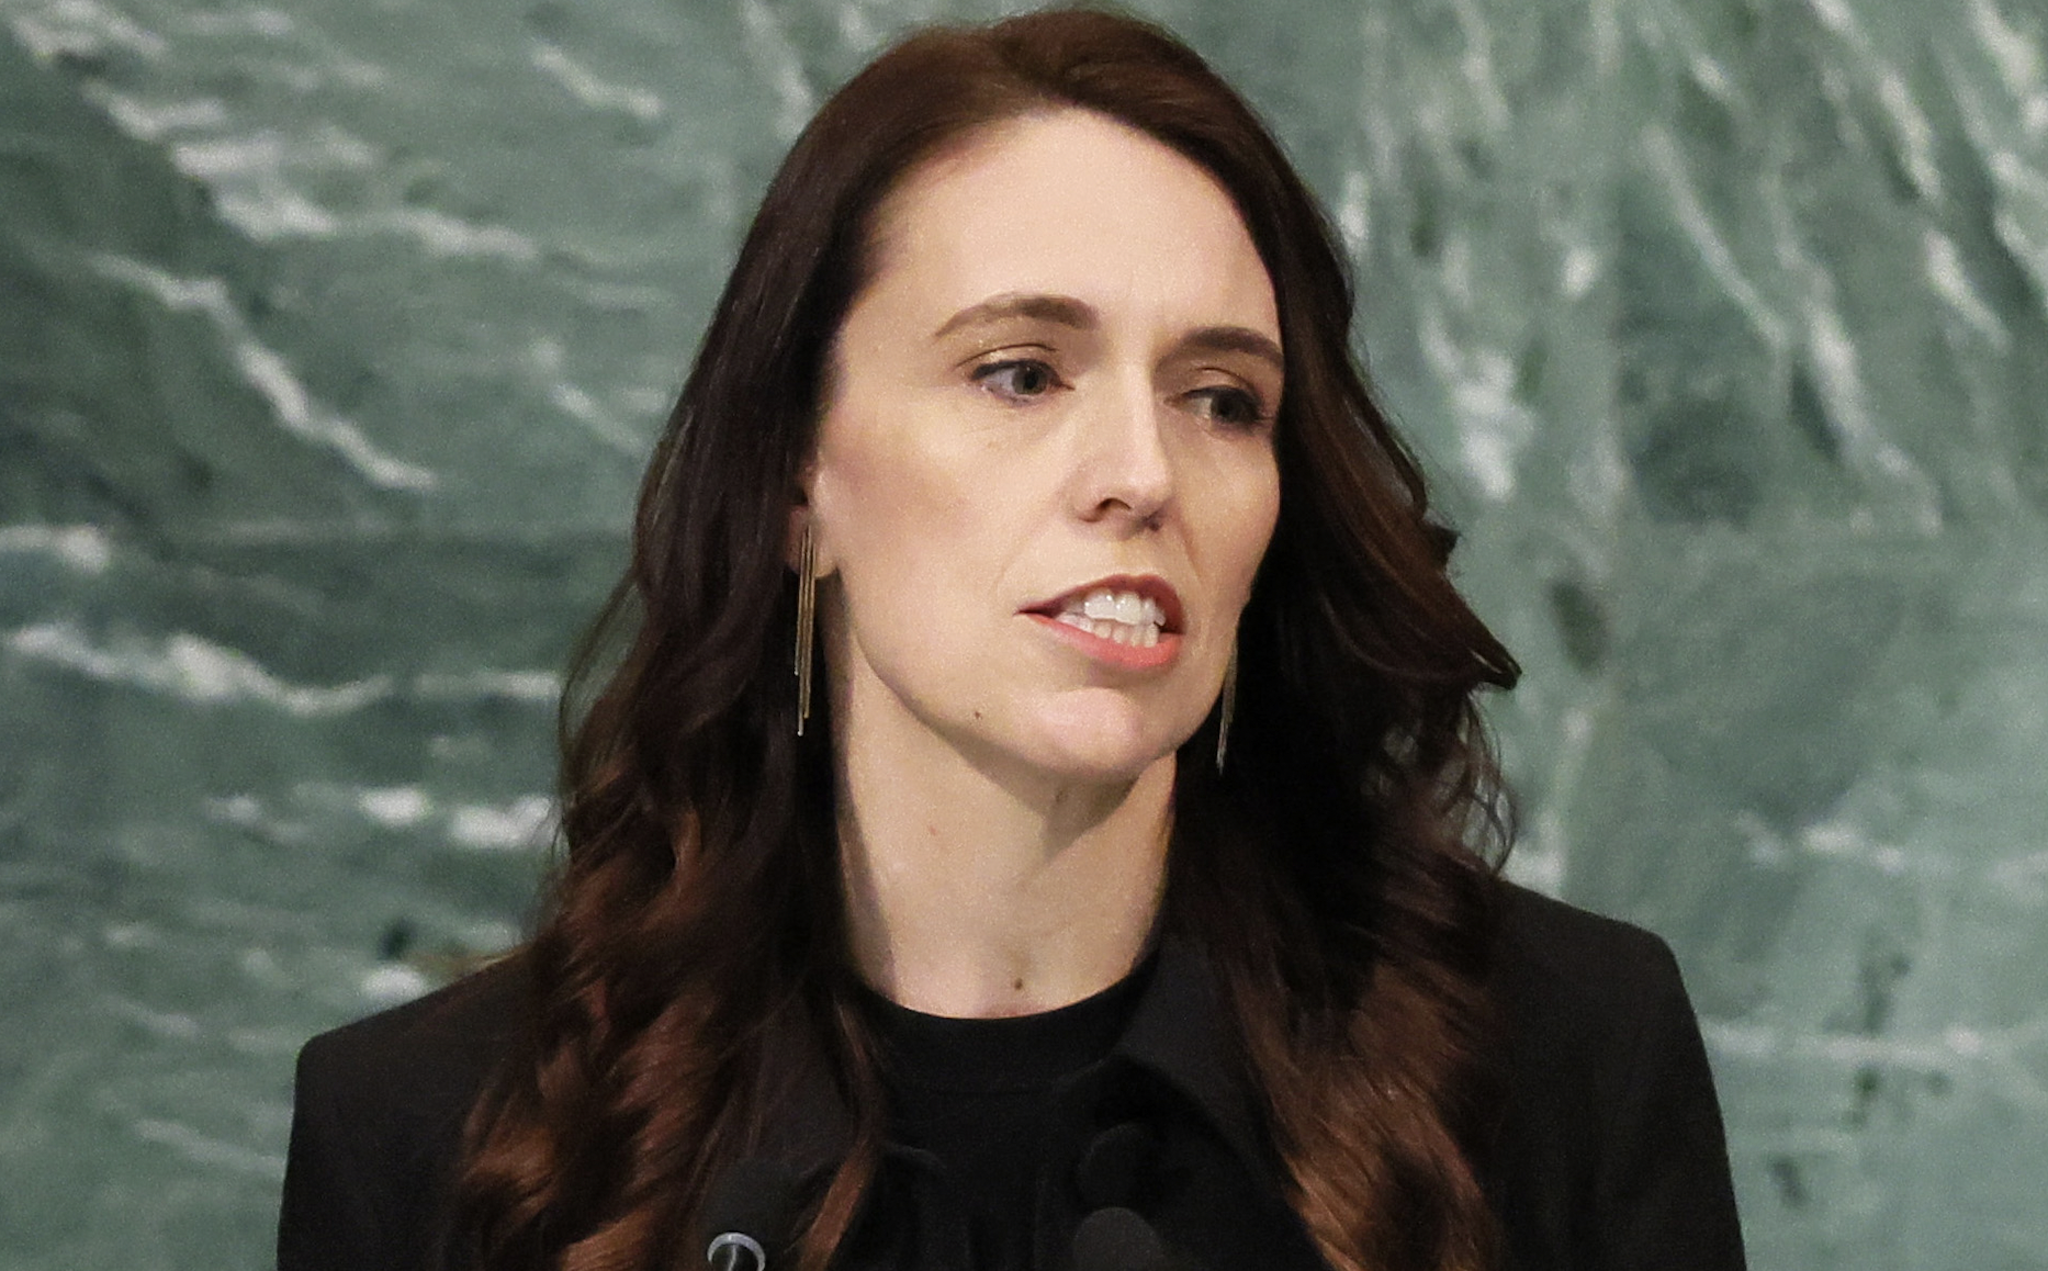 NEW YORK, NEW YORK - SEPTEMBER 23: Prime Minister of New Zealand Jacinda Ardern speaks at the 77th session of the United Nations General Assembly (UNGA) at U.N. headquarters on September 23, 2022 in New York City. After two years of holding the session virtually or in a hybrid format, 157 heads of state and representatives of government are expected to attend the General Assembly in person.